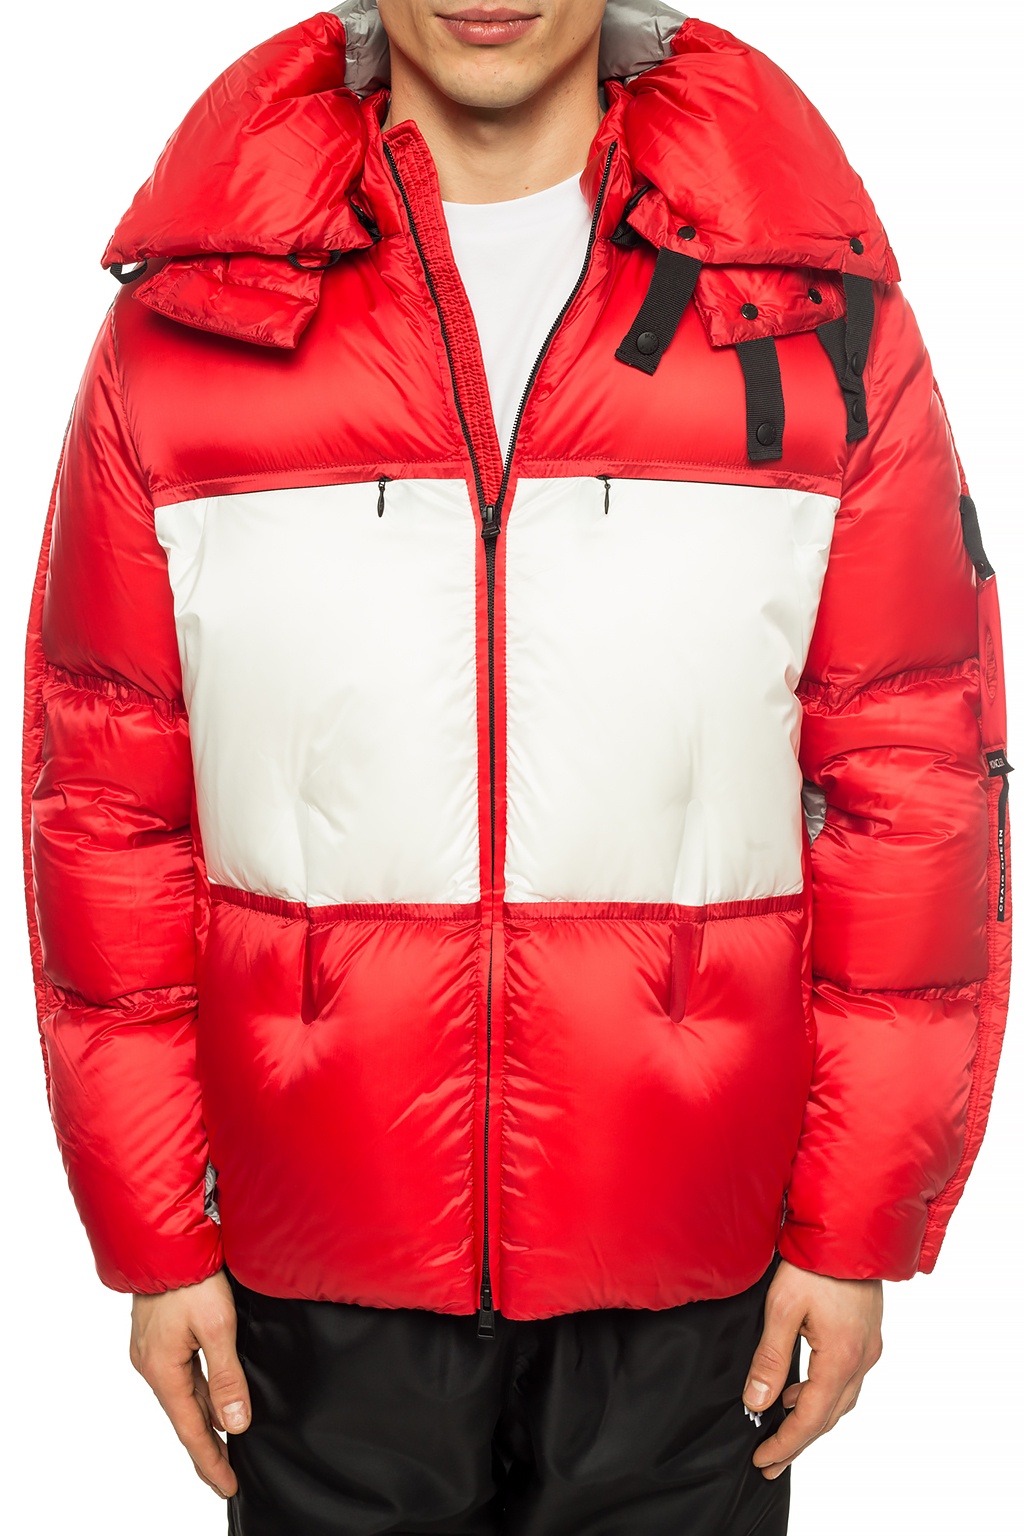 Moncler Genius 5 Lets keep in touch